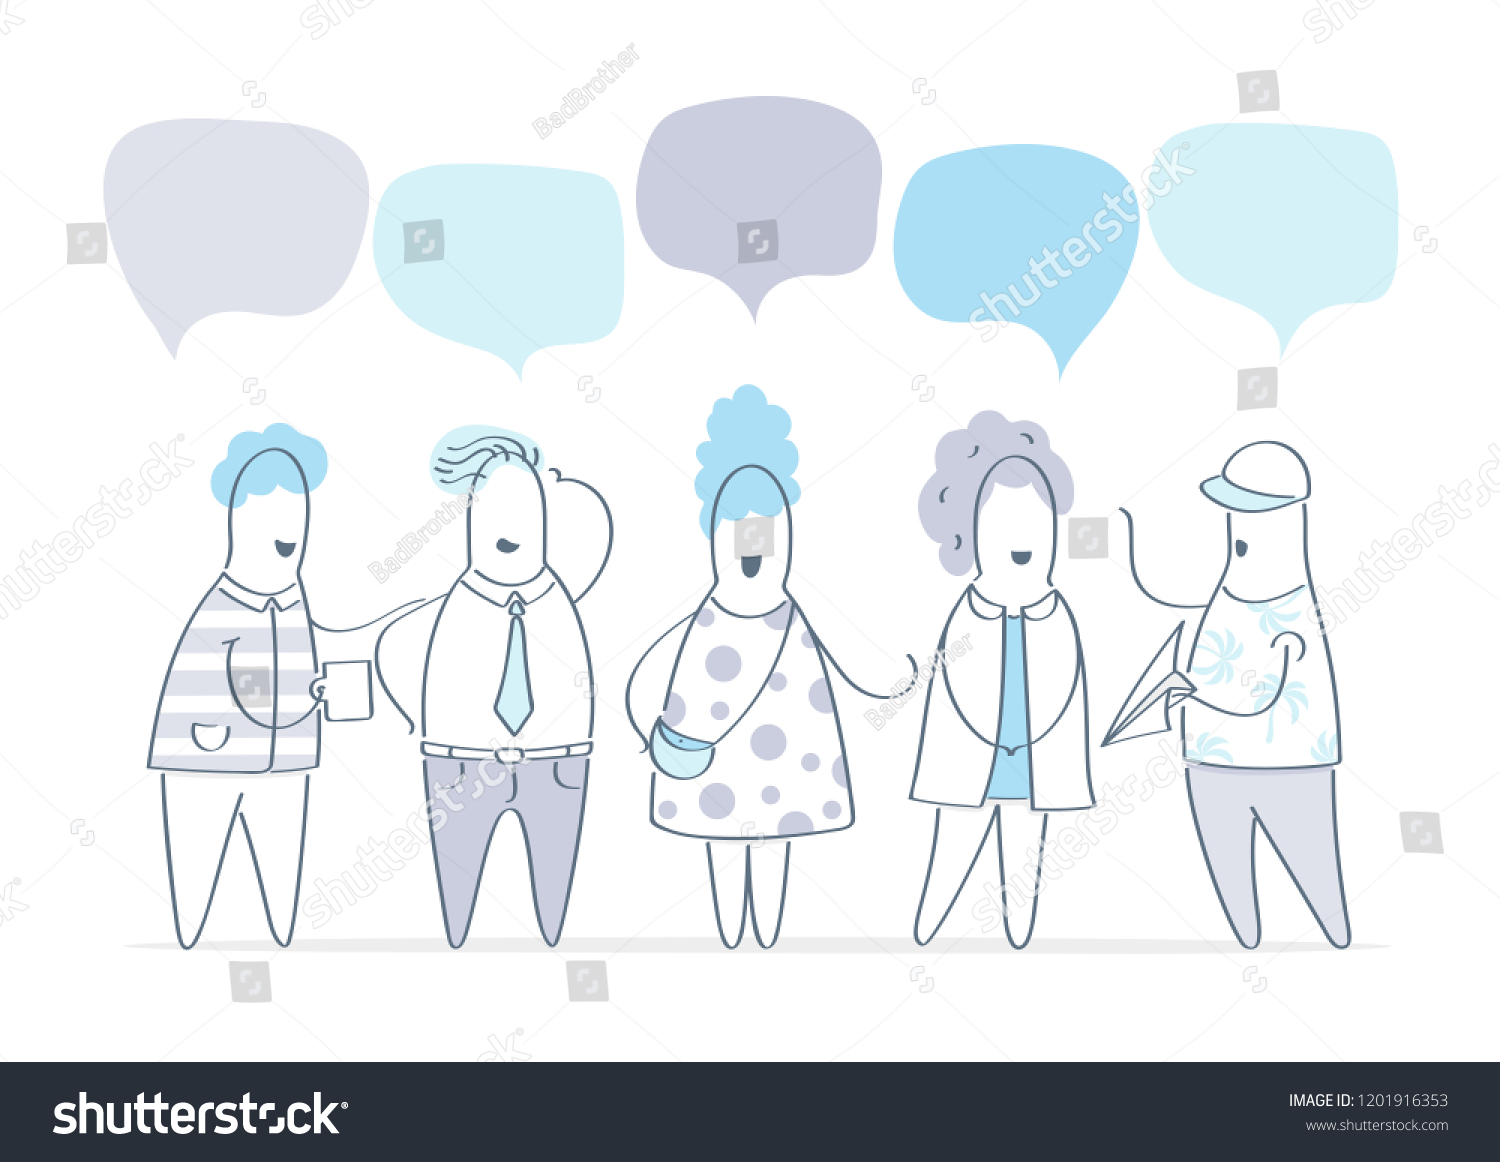 stock-vector-vector-illustration-flat-style-businessmen-discuss-social-network-group-of-people-news-social-1201916353